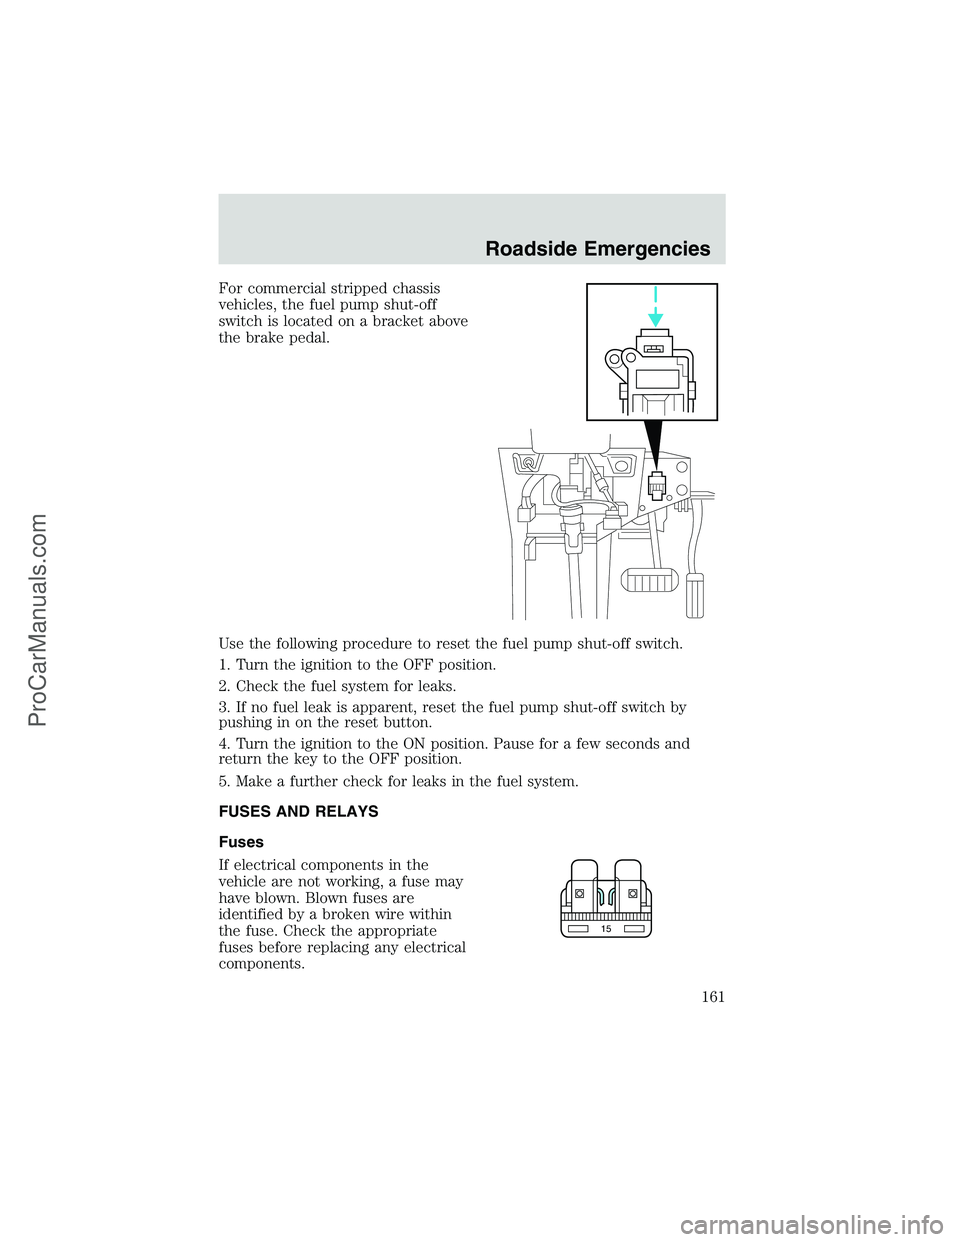 FORD E-450 2002 User Guide For commercial stripped chassis
vehicles, the fuel pump shut-off
switch is located on a bracket above
the brake pedal.
Use the following procedure to reset the fuel pump shut-off switch.
1. Turn the i